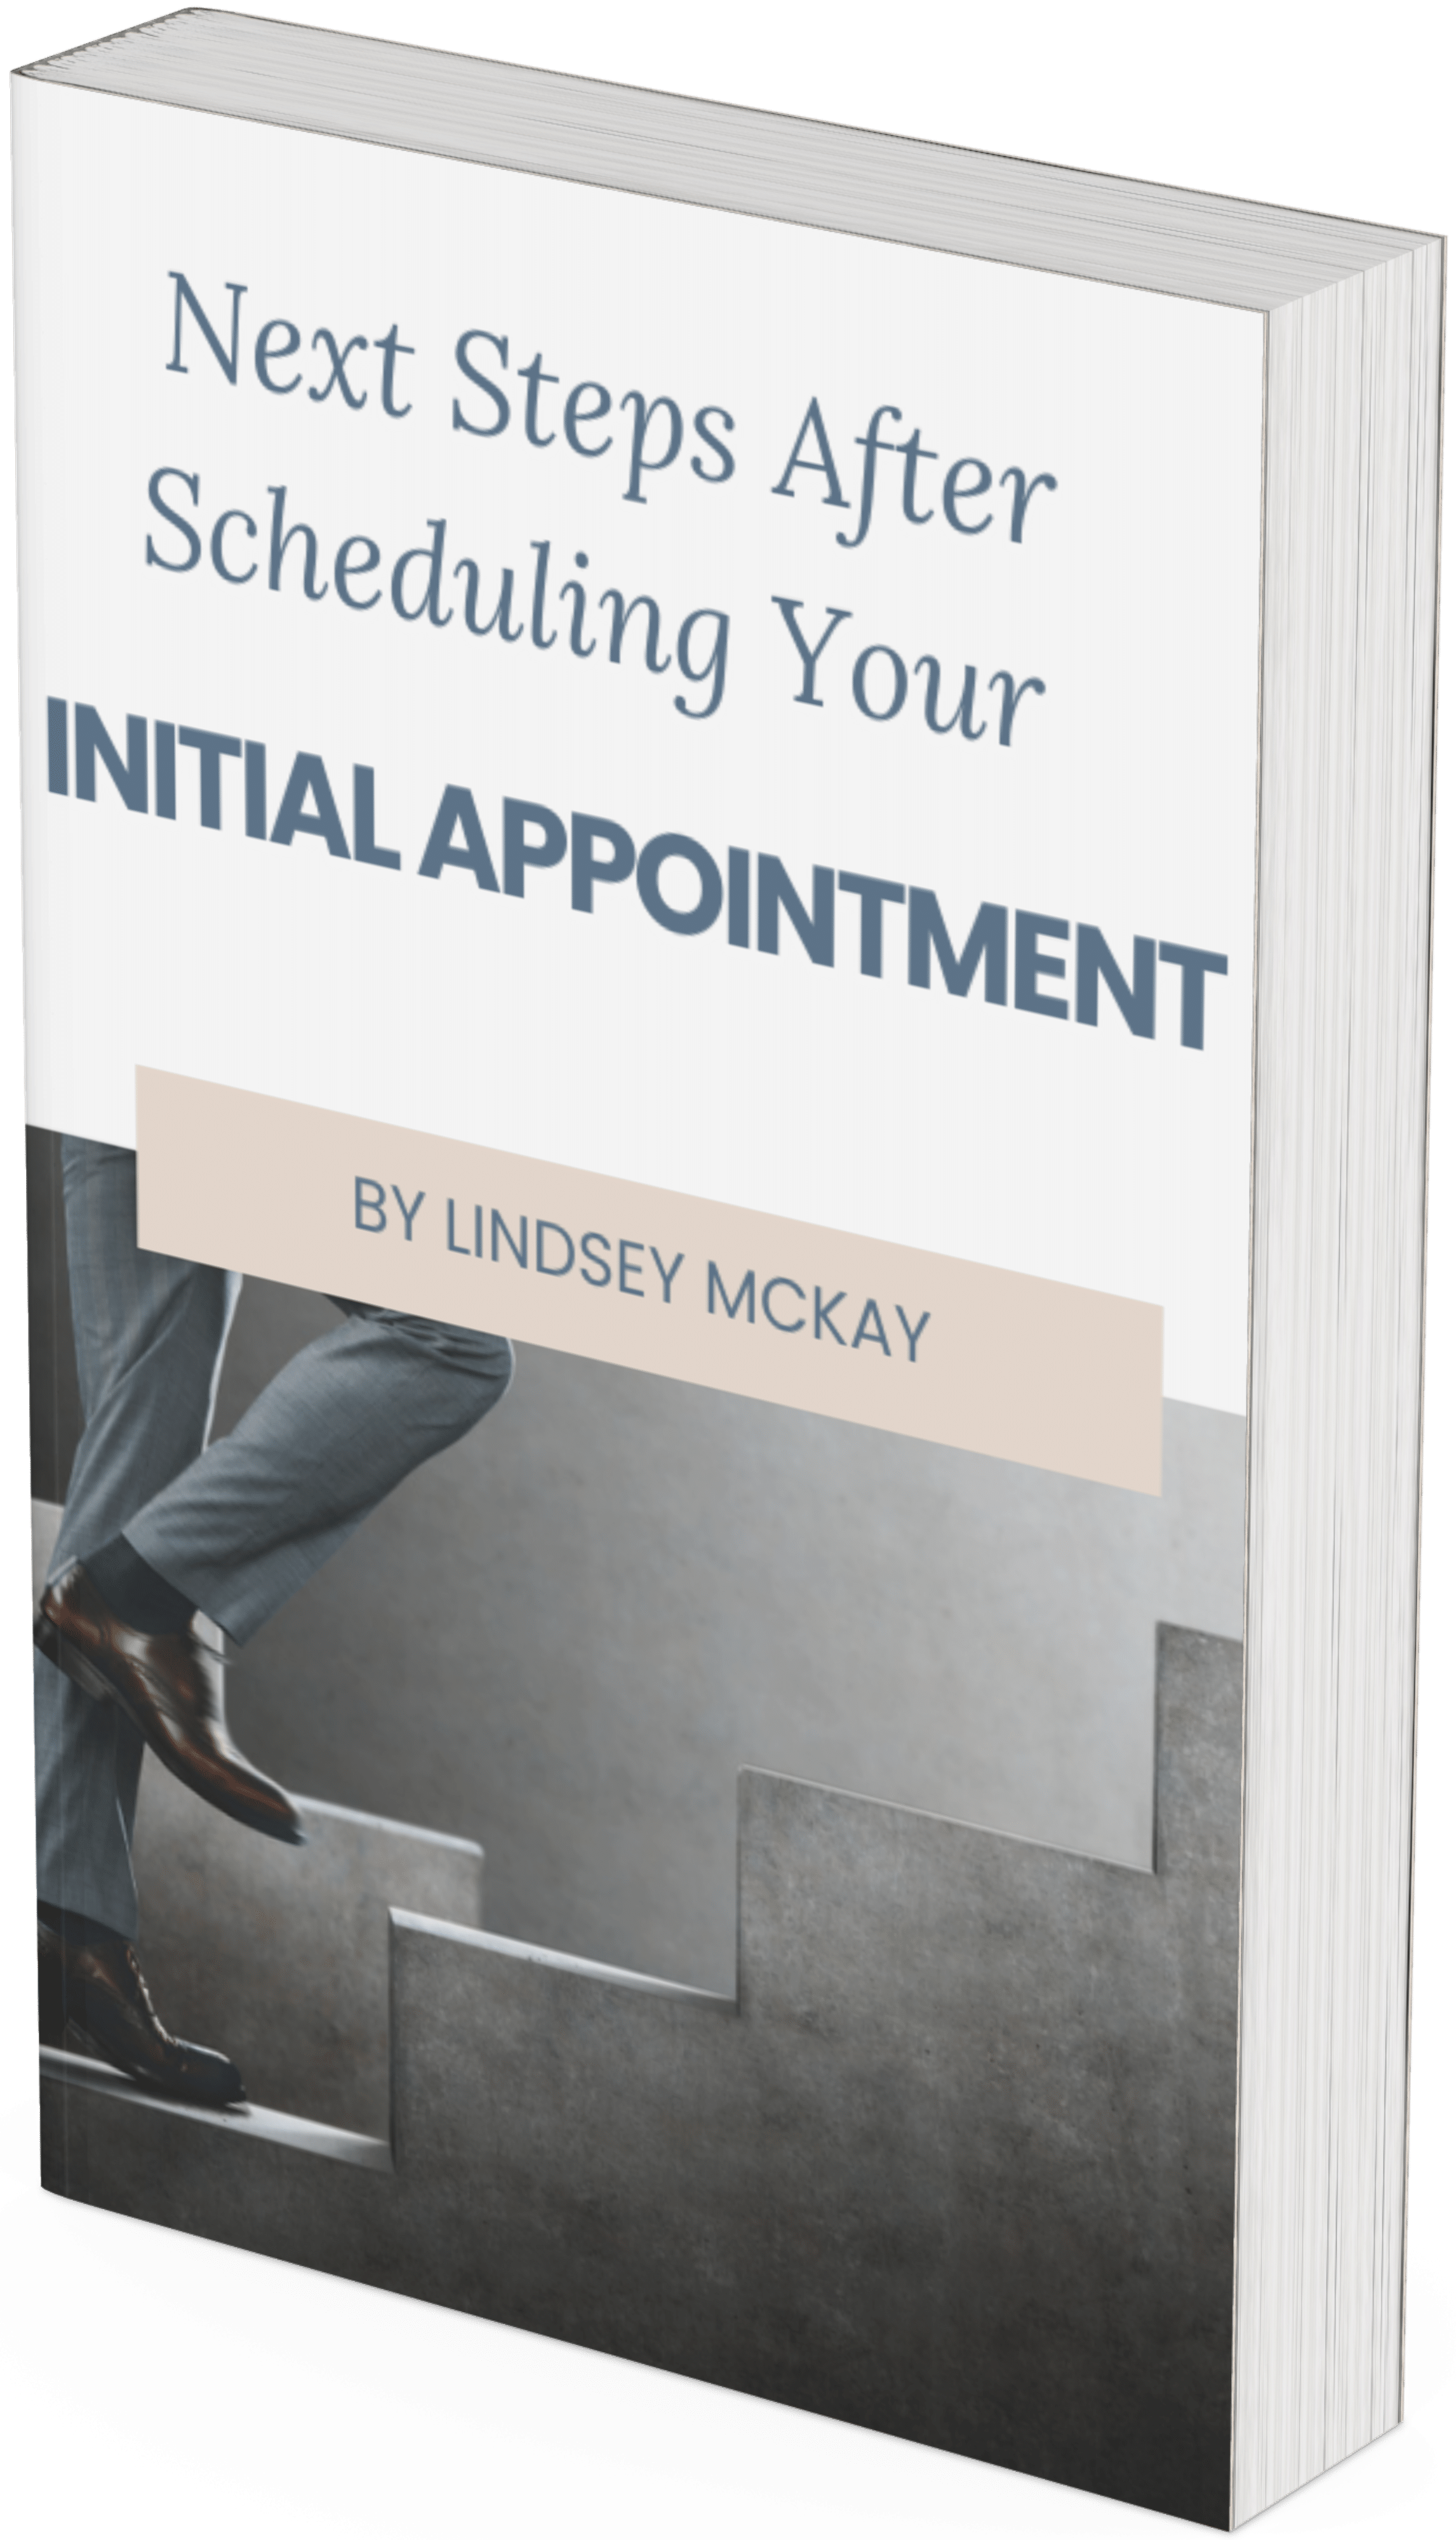 Next Steps After Scheduling Your Initial Appointment​